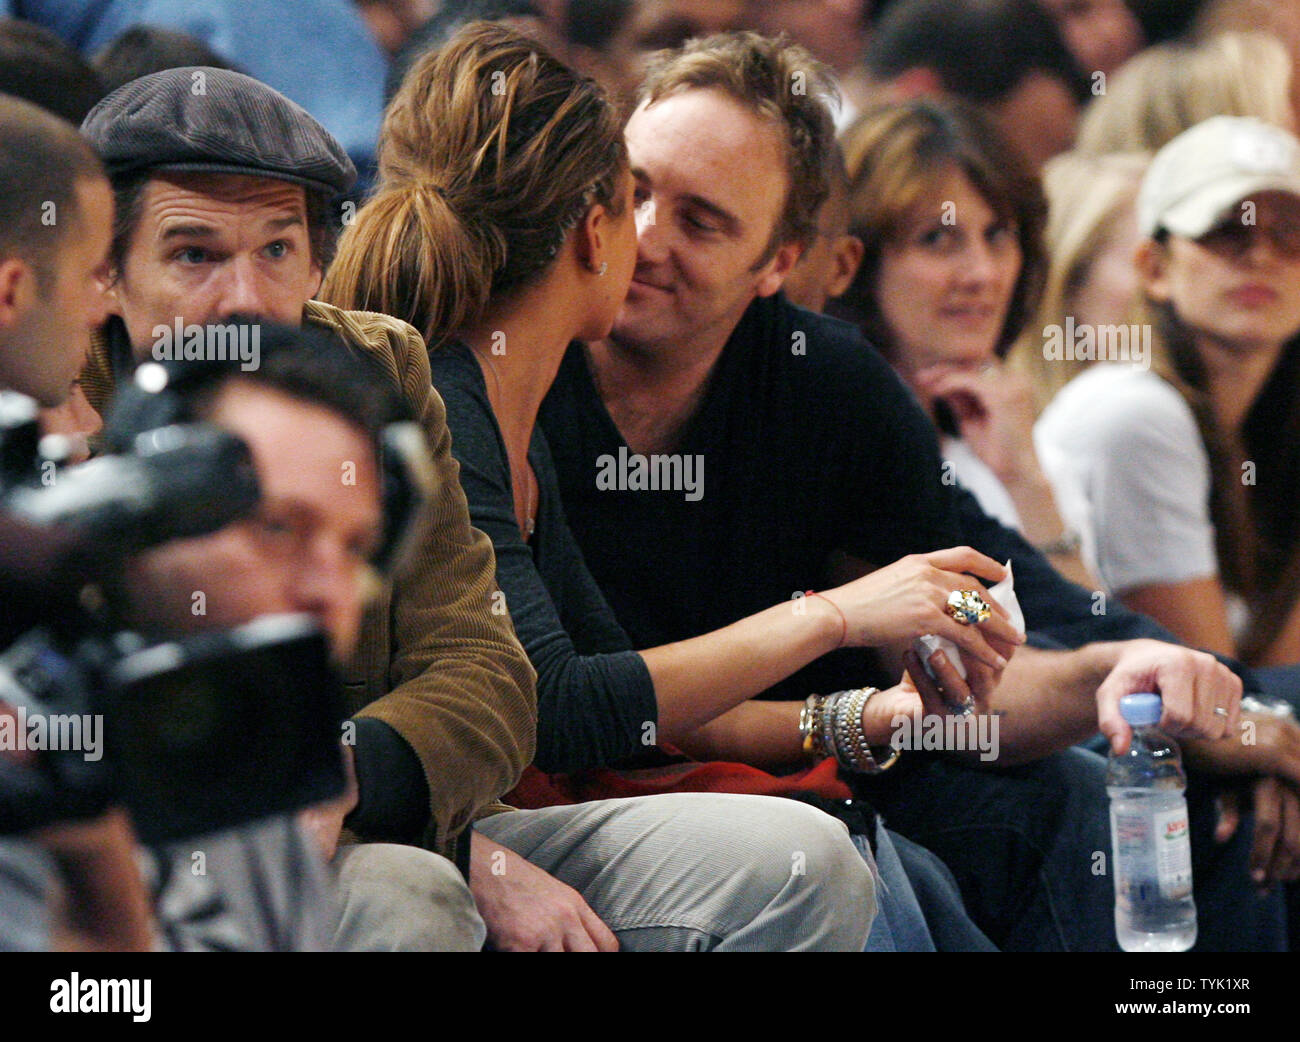 Nikki Cox and Jay Mohr kiss while the New Jersey Nets play the New York Knicks at Madison Square Garden in New York City on March 18, 2009. The Nets defeated the Knicks 115-89.    (UPI Photo/John Angelillo) Stock Photo